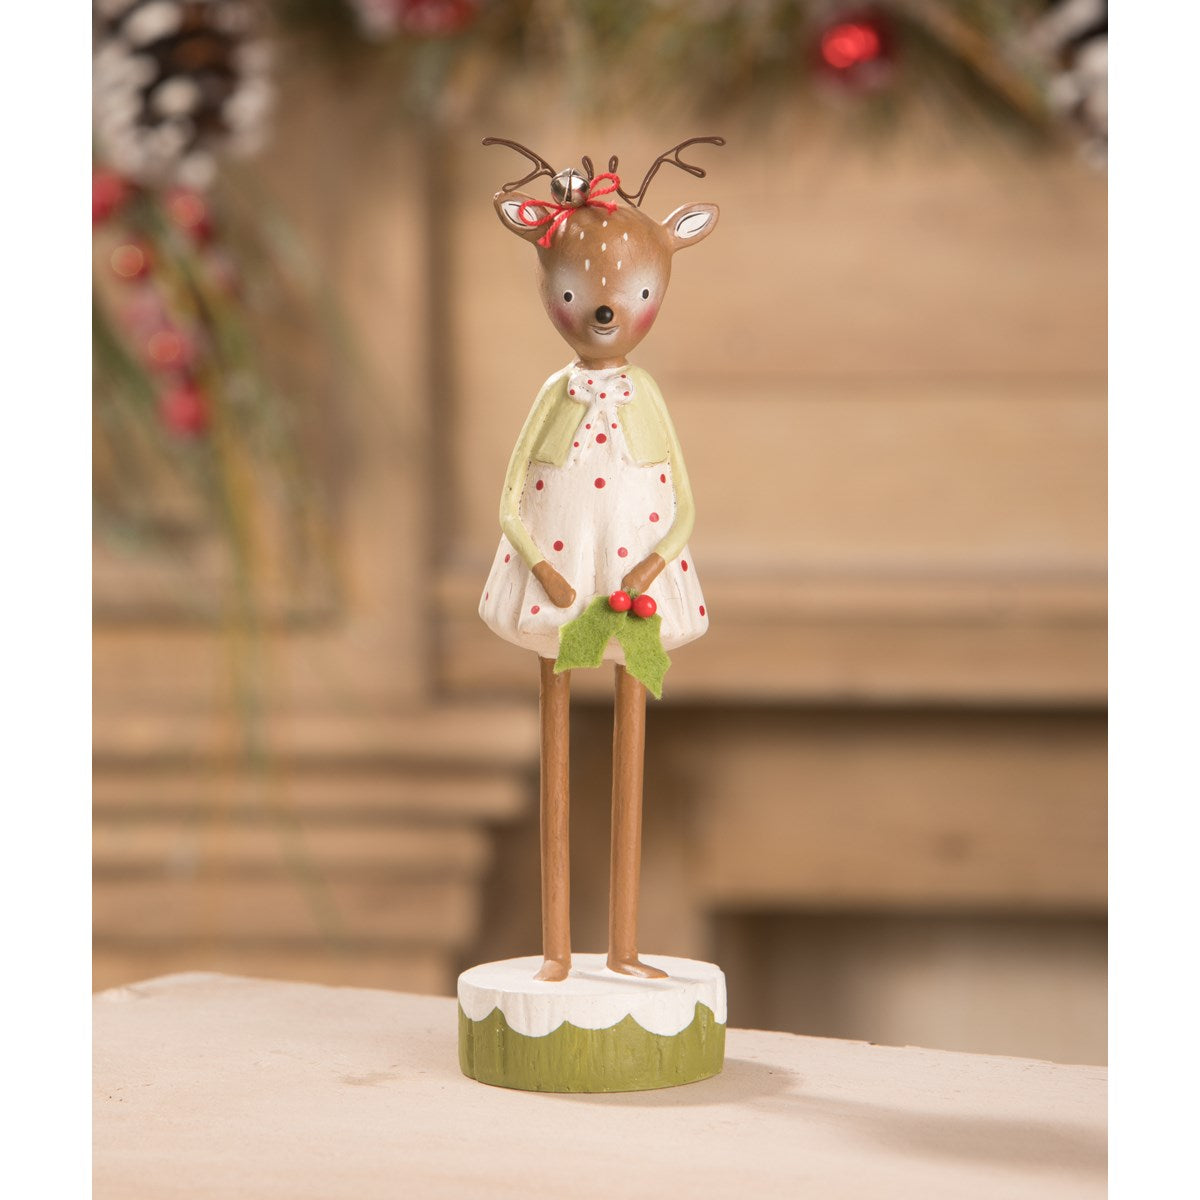 Reindeer Girl with Holly